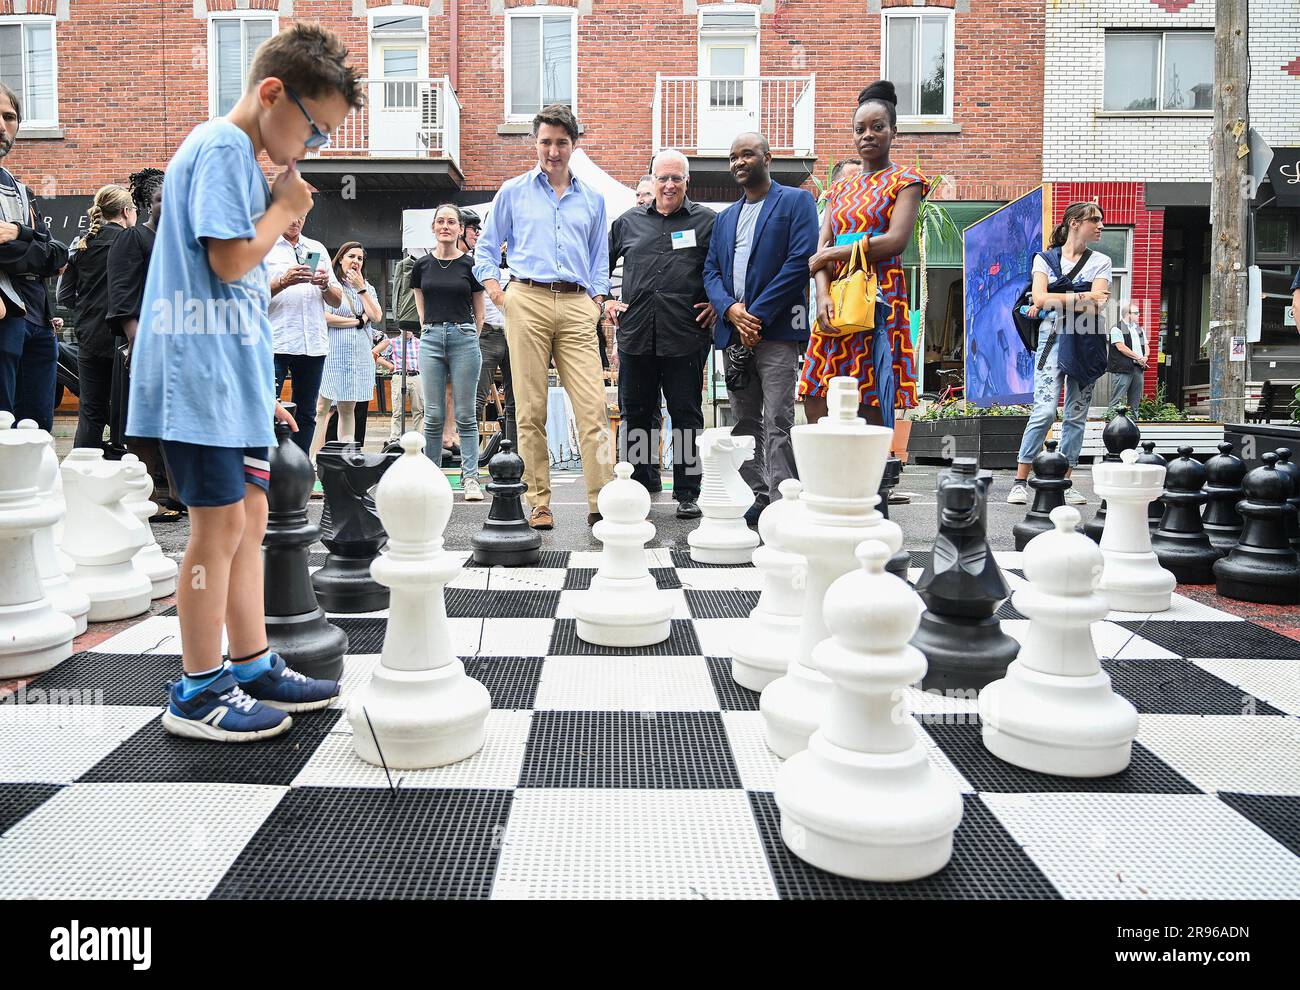 The little boy ponders the next chess move. Stock Photo